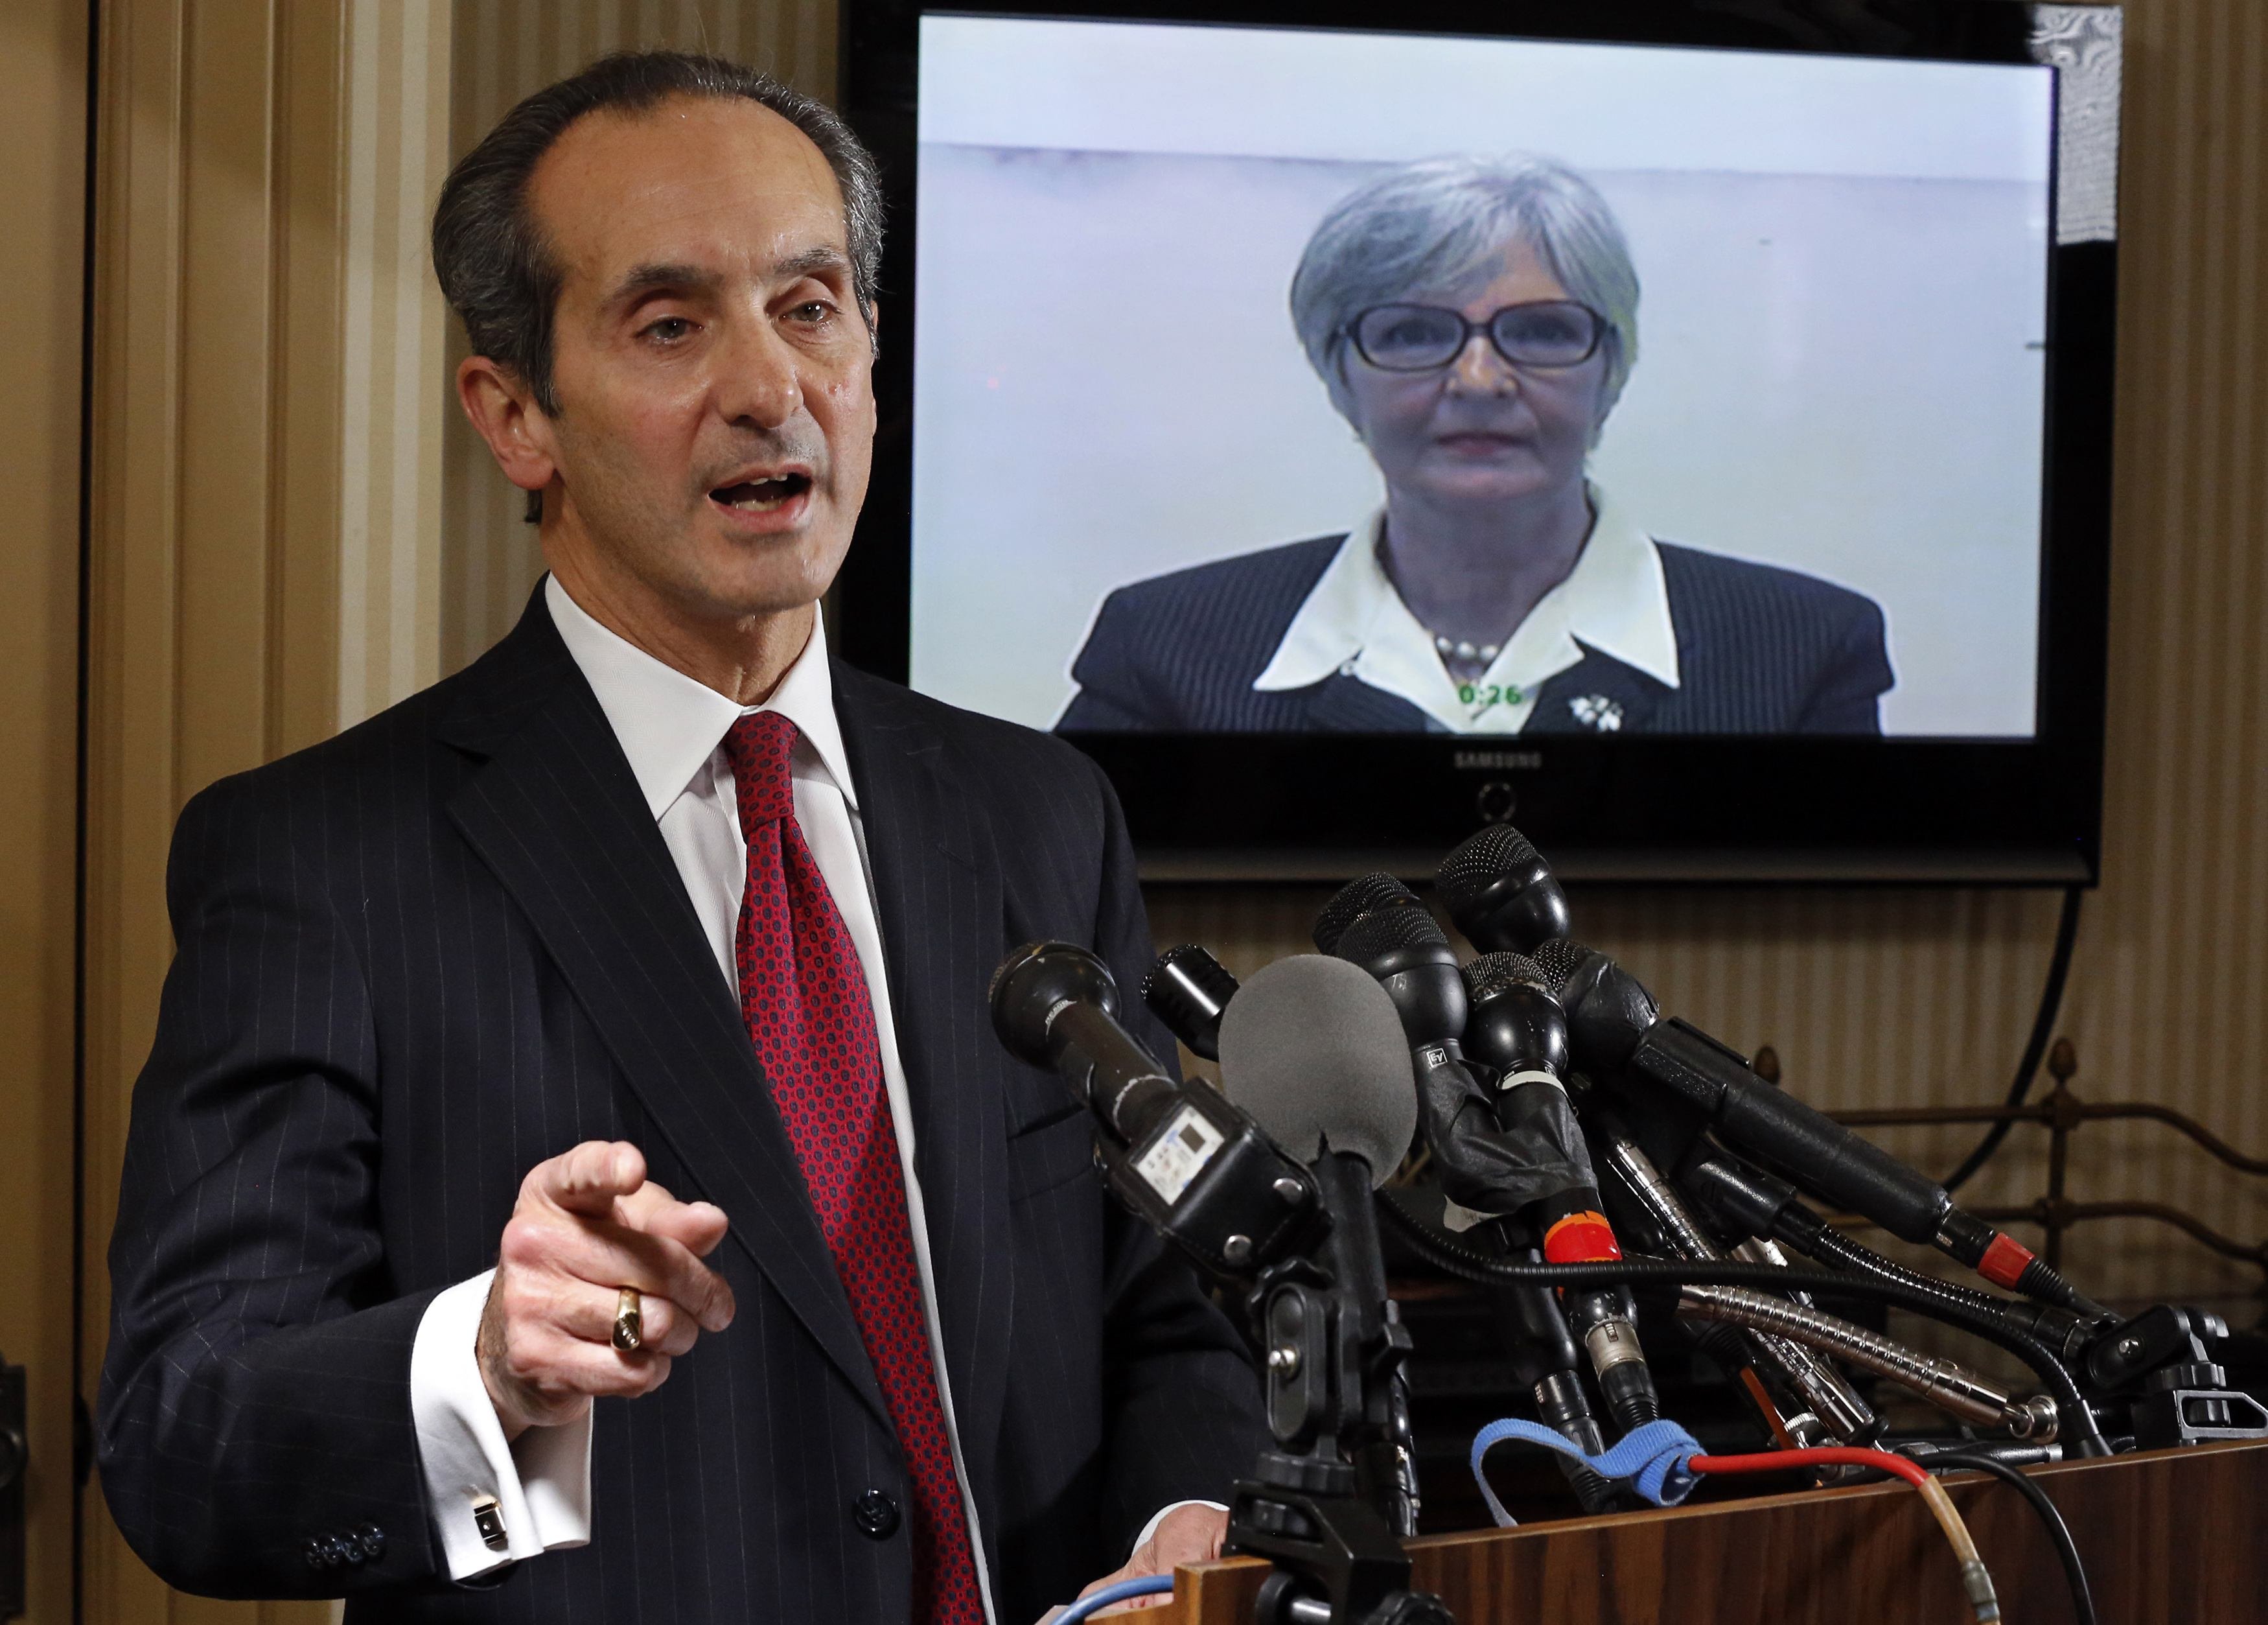 Tamara Green, the plaintiff in a defamation lawsuit claiming that she was "sexually assaulted by comedian Bill Cosby in the 1970s" watches by video link from California as her attorney Joseph Cammarata (L) speaks about the suit that they have filed to a news conference in Washington on Dec. 10, 2014.